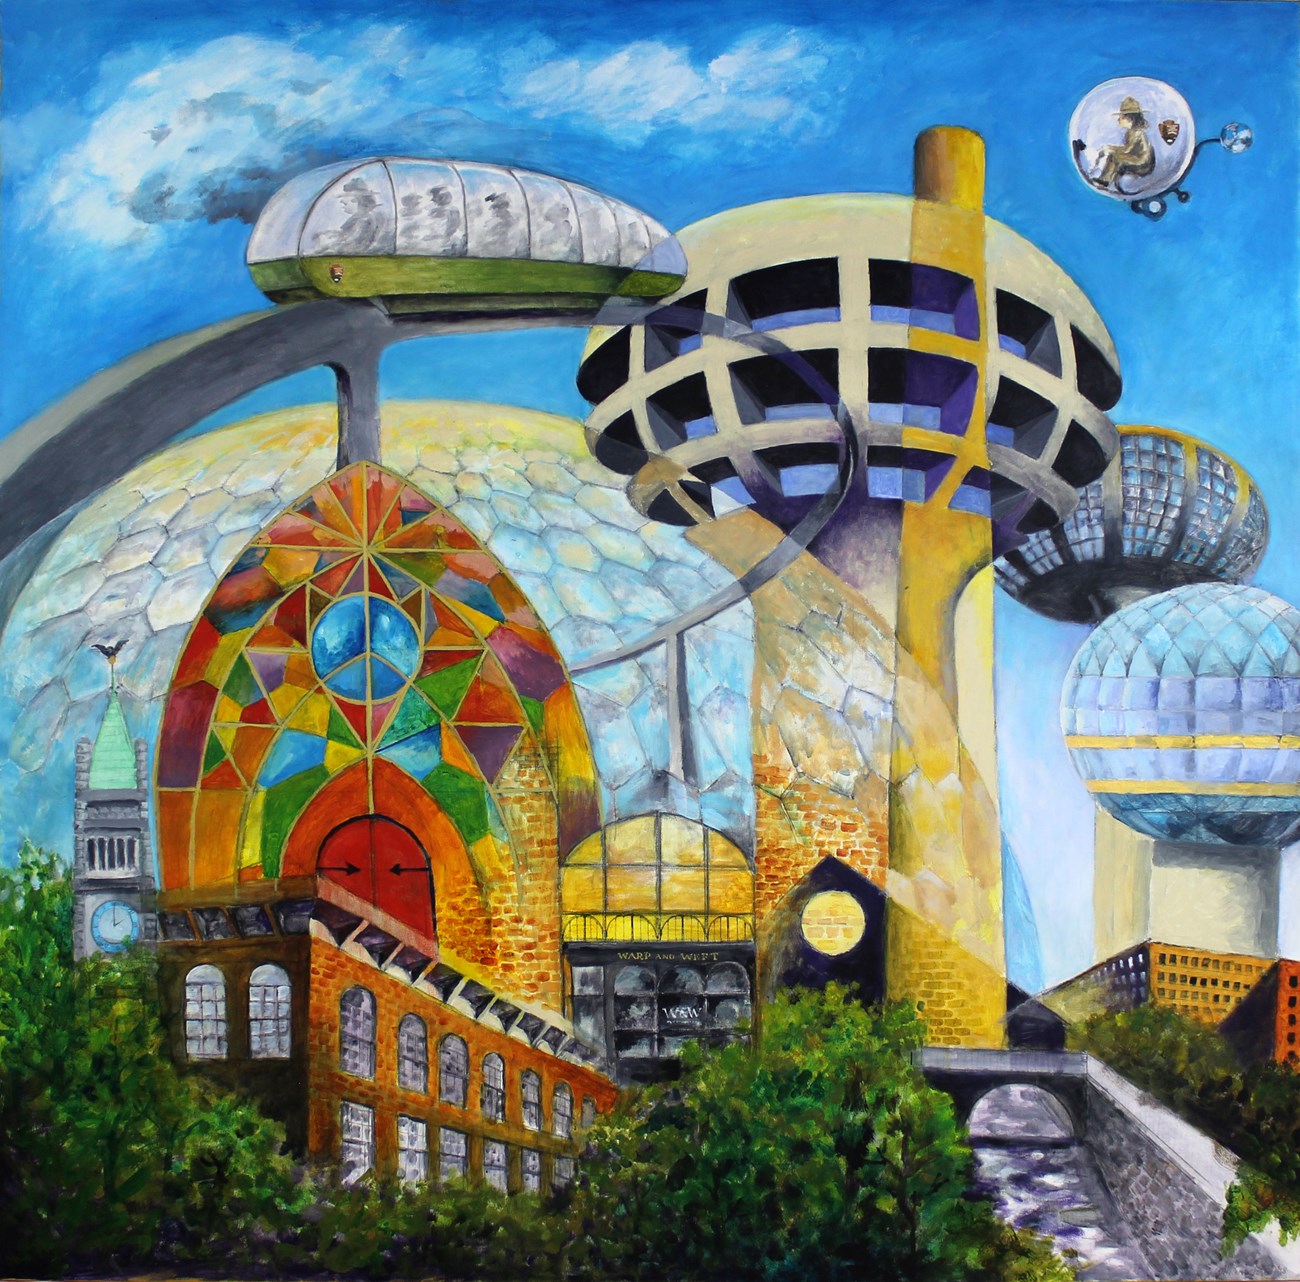 A painting of a futuristic city. A ranger pilots a flying craft by a monorail. There are spherical observation decks atop towers, a domed city, and architecture of the old mill buildings.